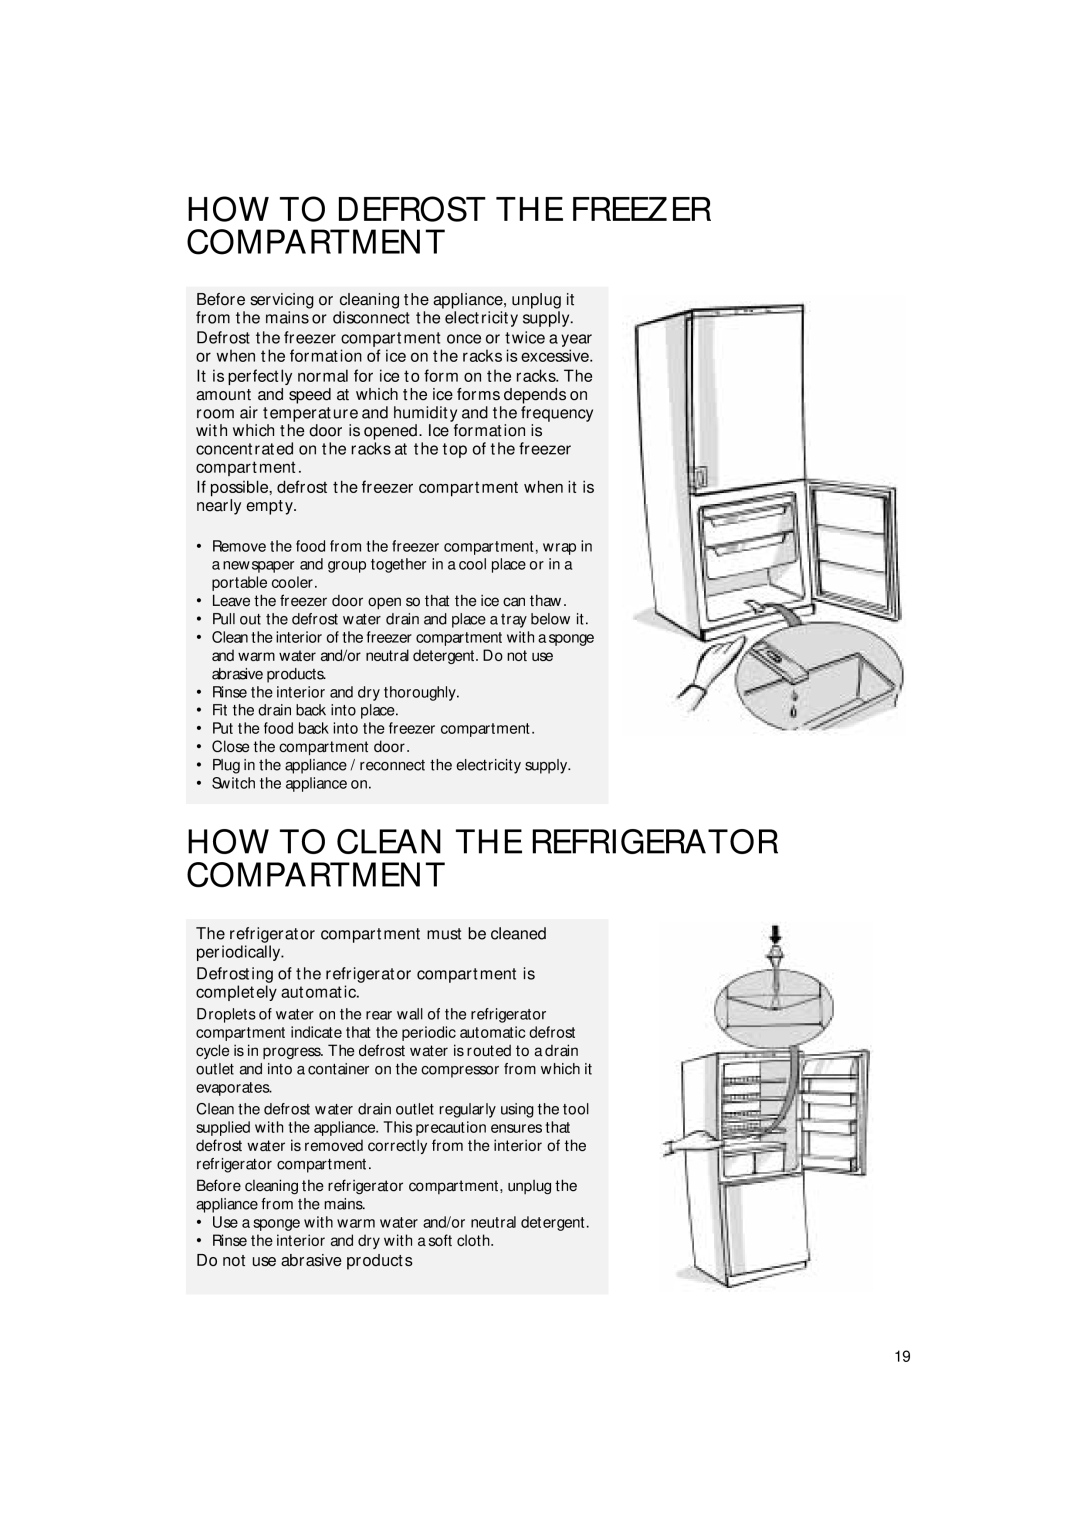 Smeg CR327AV1 manual How To Defrost The Freezer Compartment, How To Clean The Refrigerator Compartment 